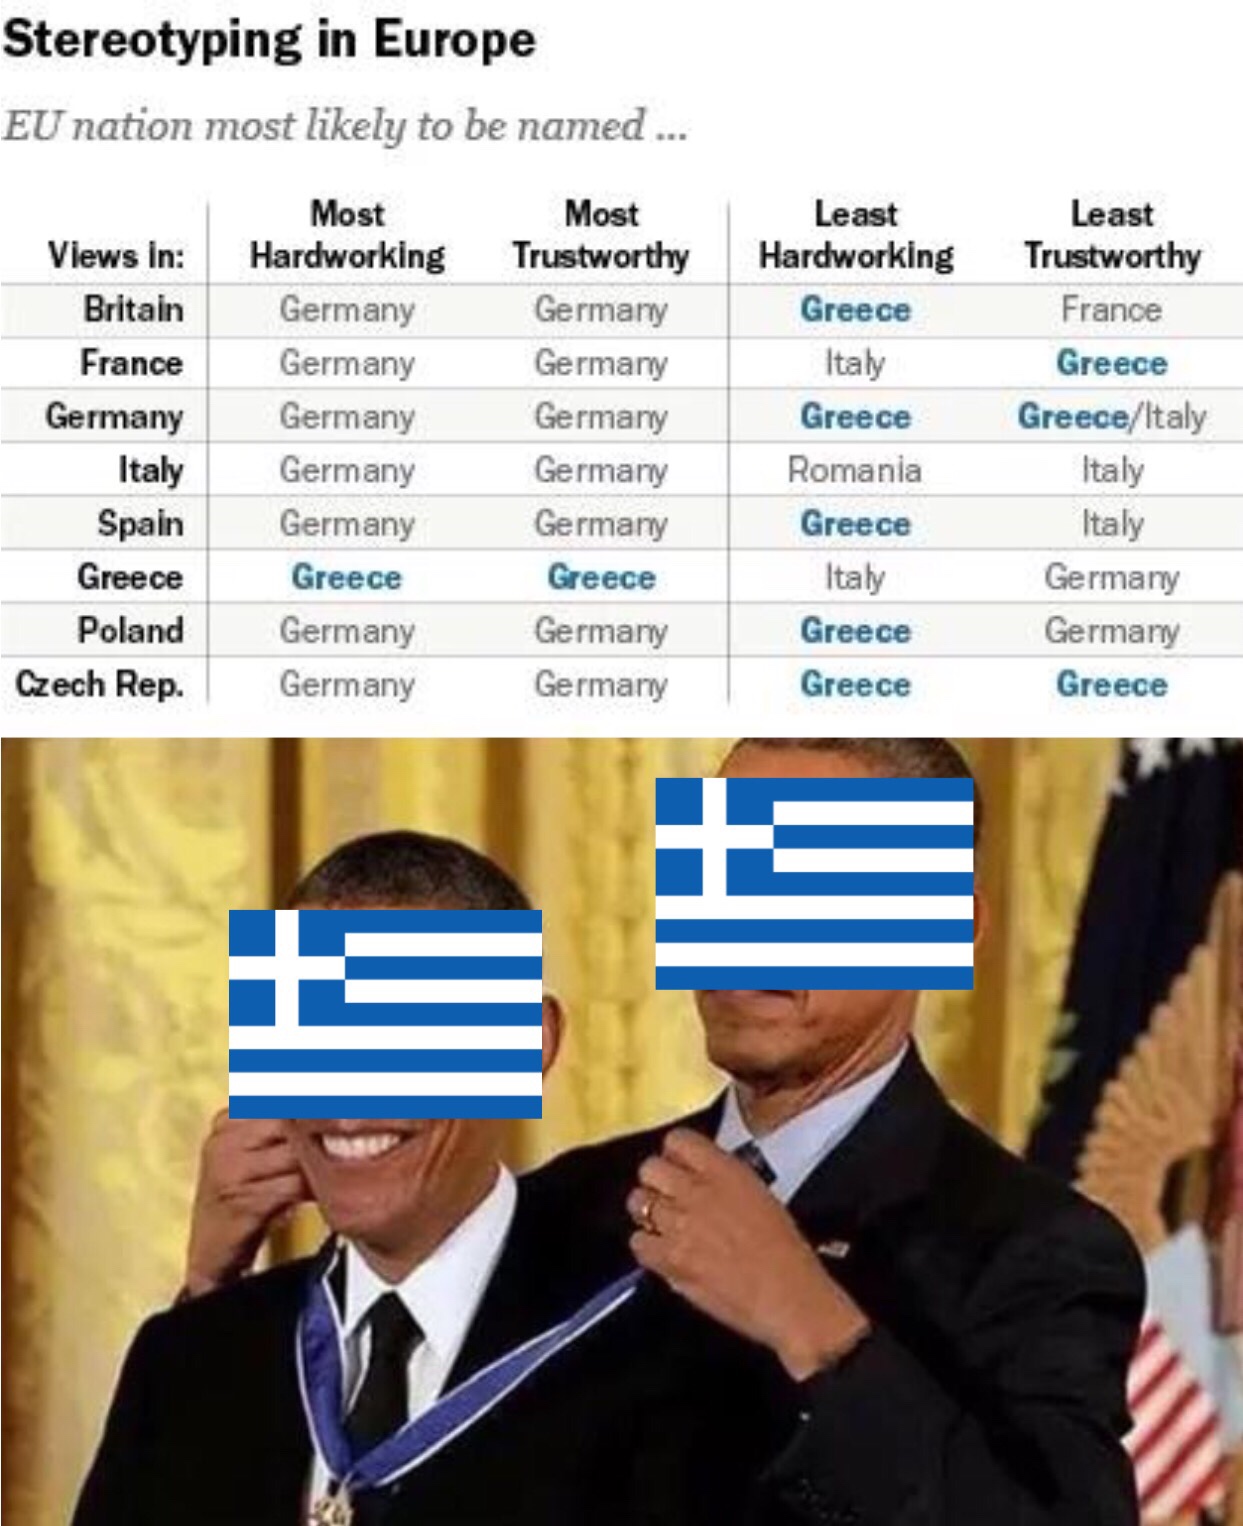 obama awarding himself meme - Stereotyping in Europe Eu nation most ly to be named... Views in Britain France Germany Italy Spain Greece Poland Czech Rep. Most Hardworking Germany Germany Germany Germany Germany Greece Germany Germany Most Trustworthy Ger